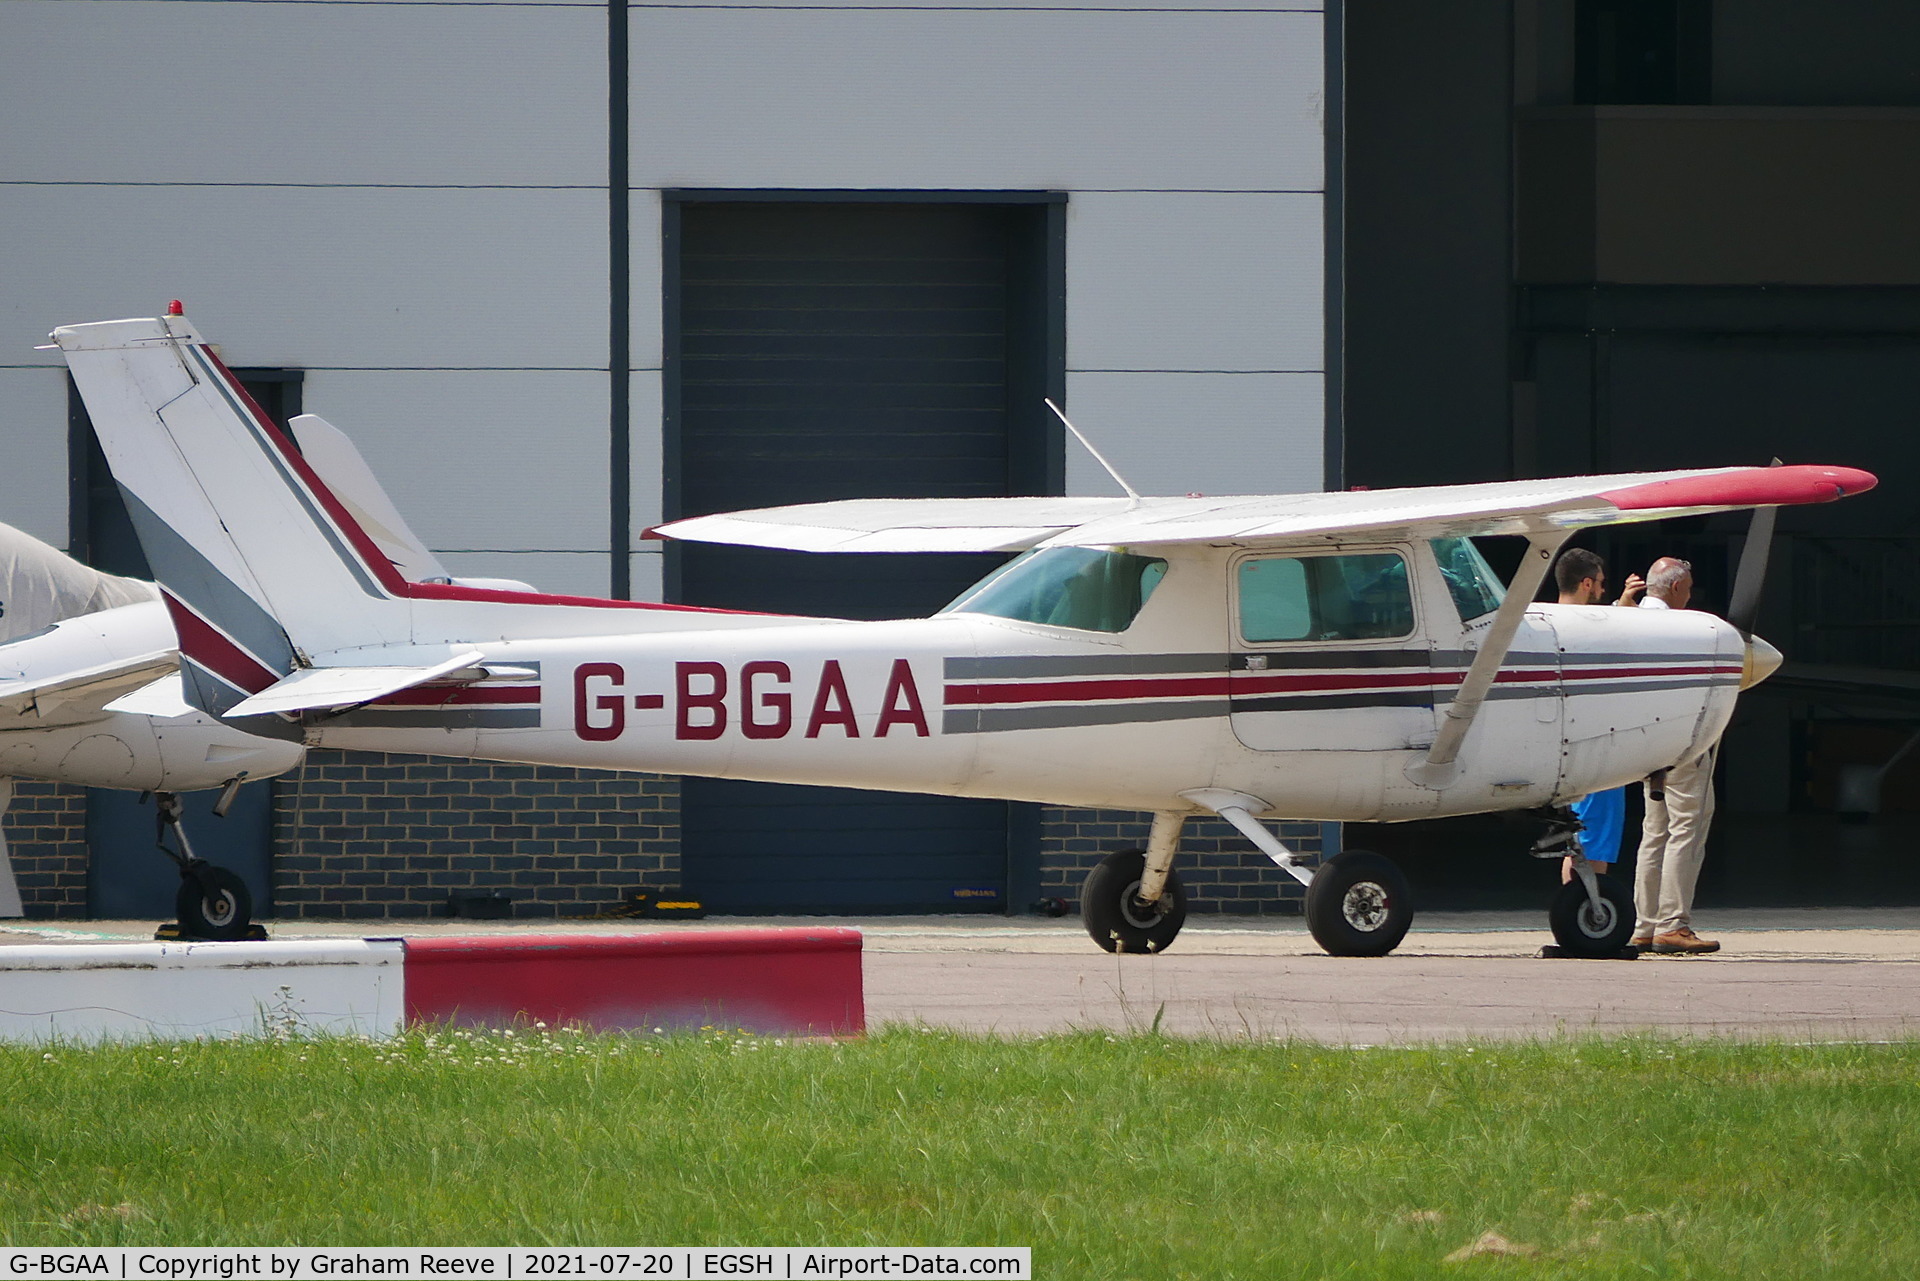 G-BGAA, 1978 Cessna 152 C/N 152-81894, Parked at Norwich.